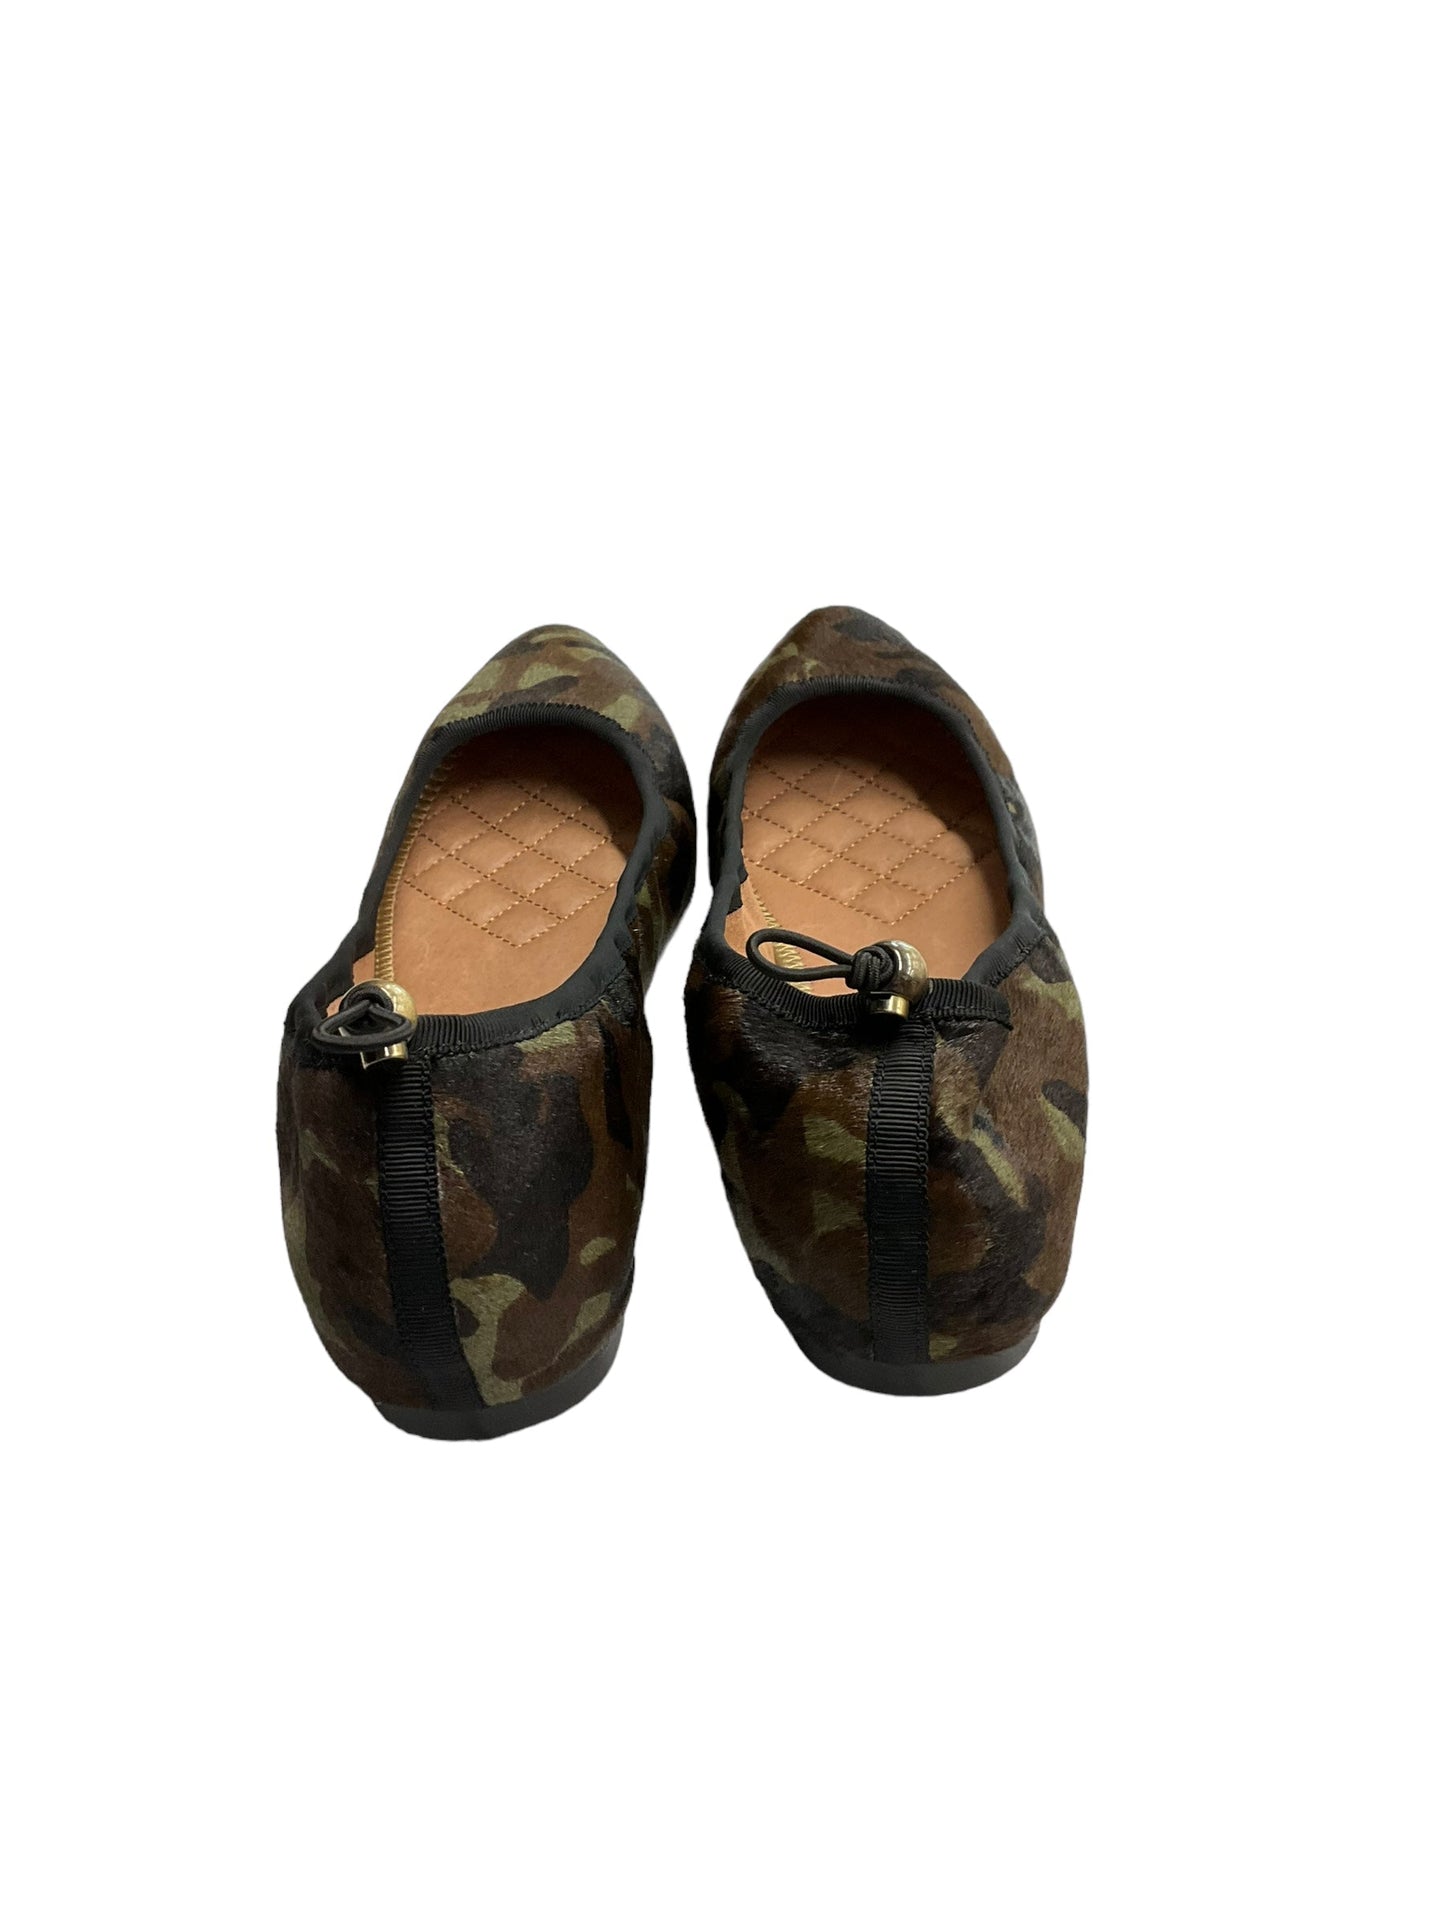 Camouflage Print Shoes Flats Vince Camuto, Size 9.5